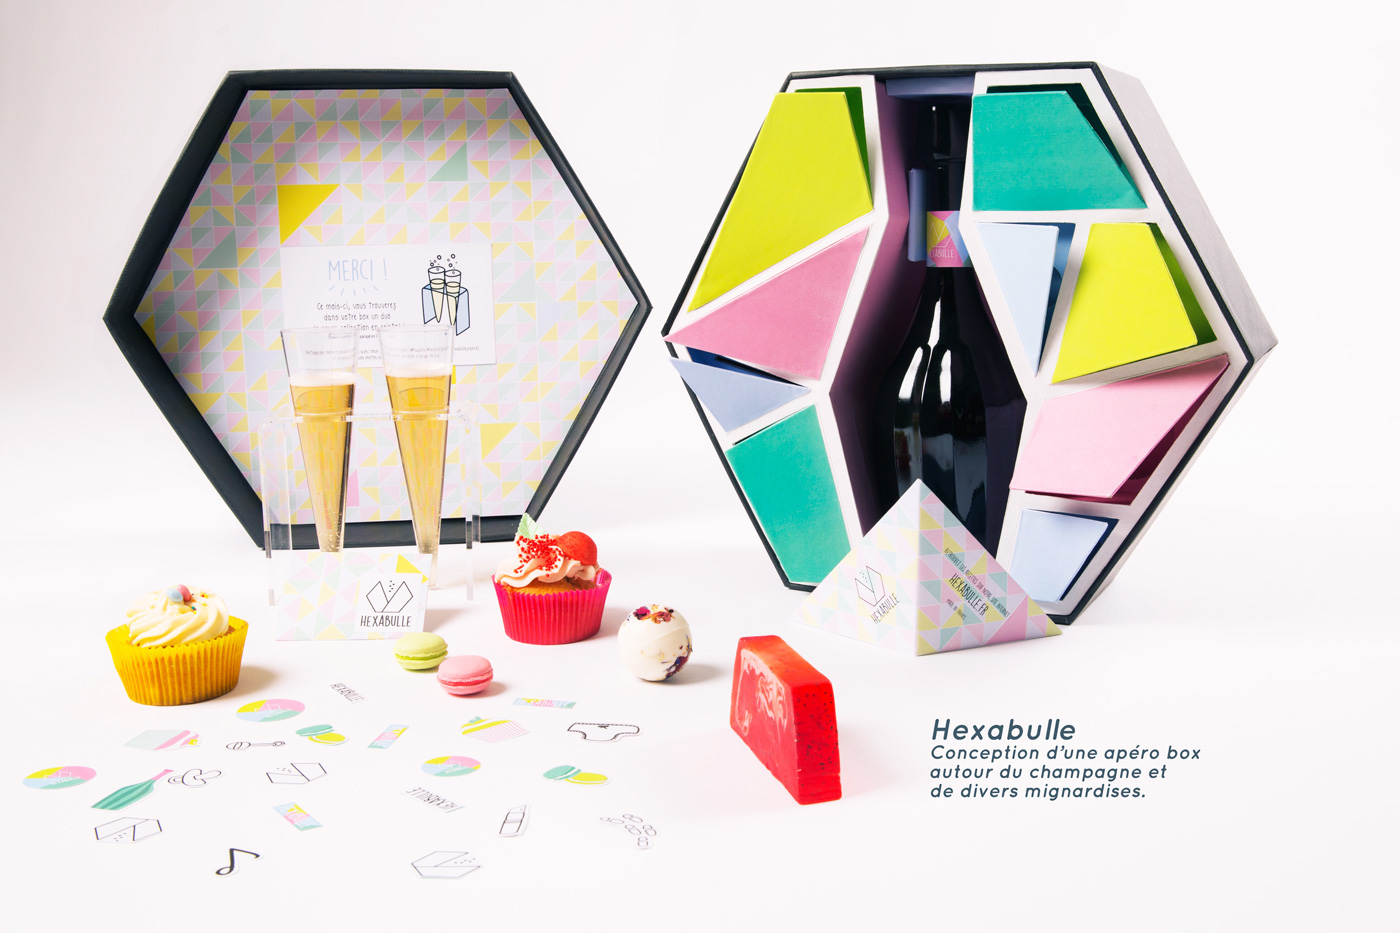 champagne box hexabulle box packaging colors Pastels macarons cupcakes recipes poster box pattern